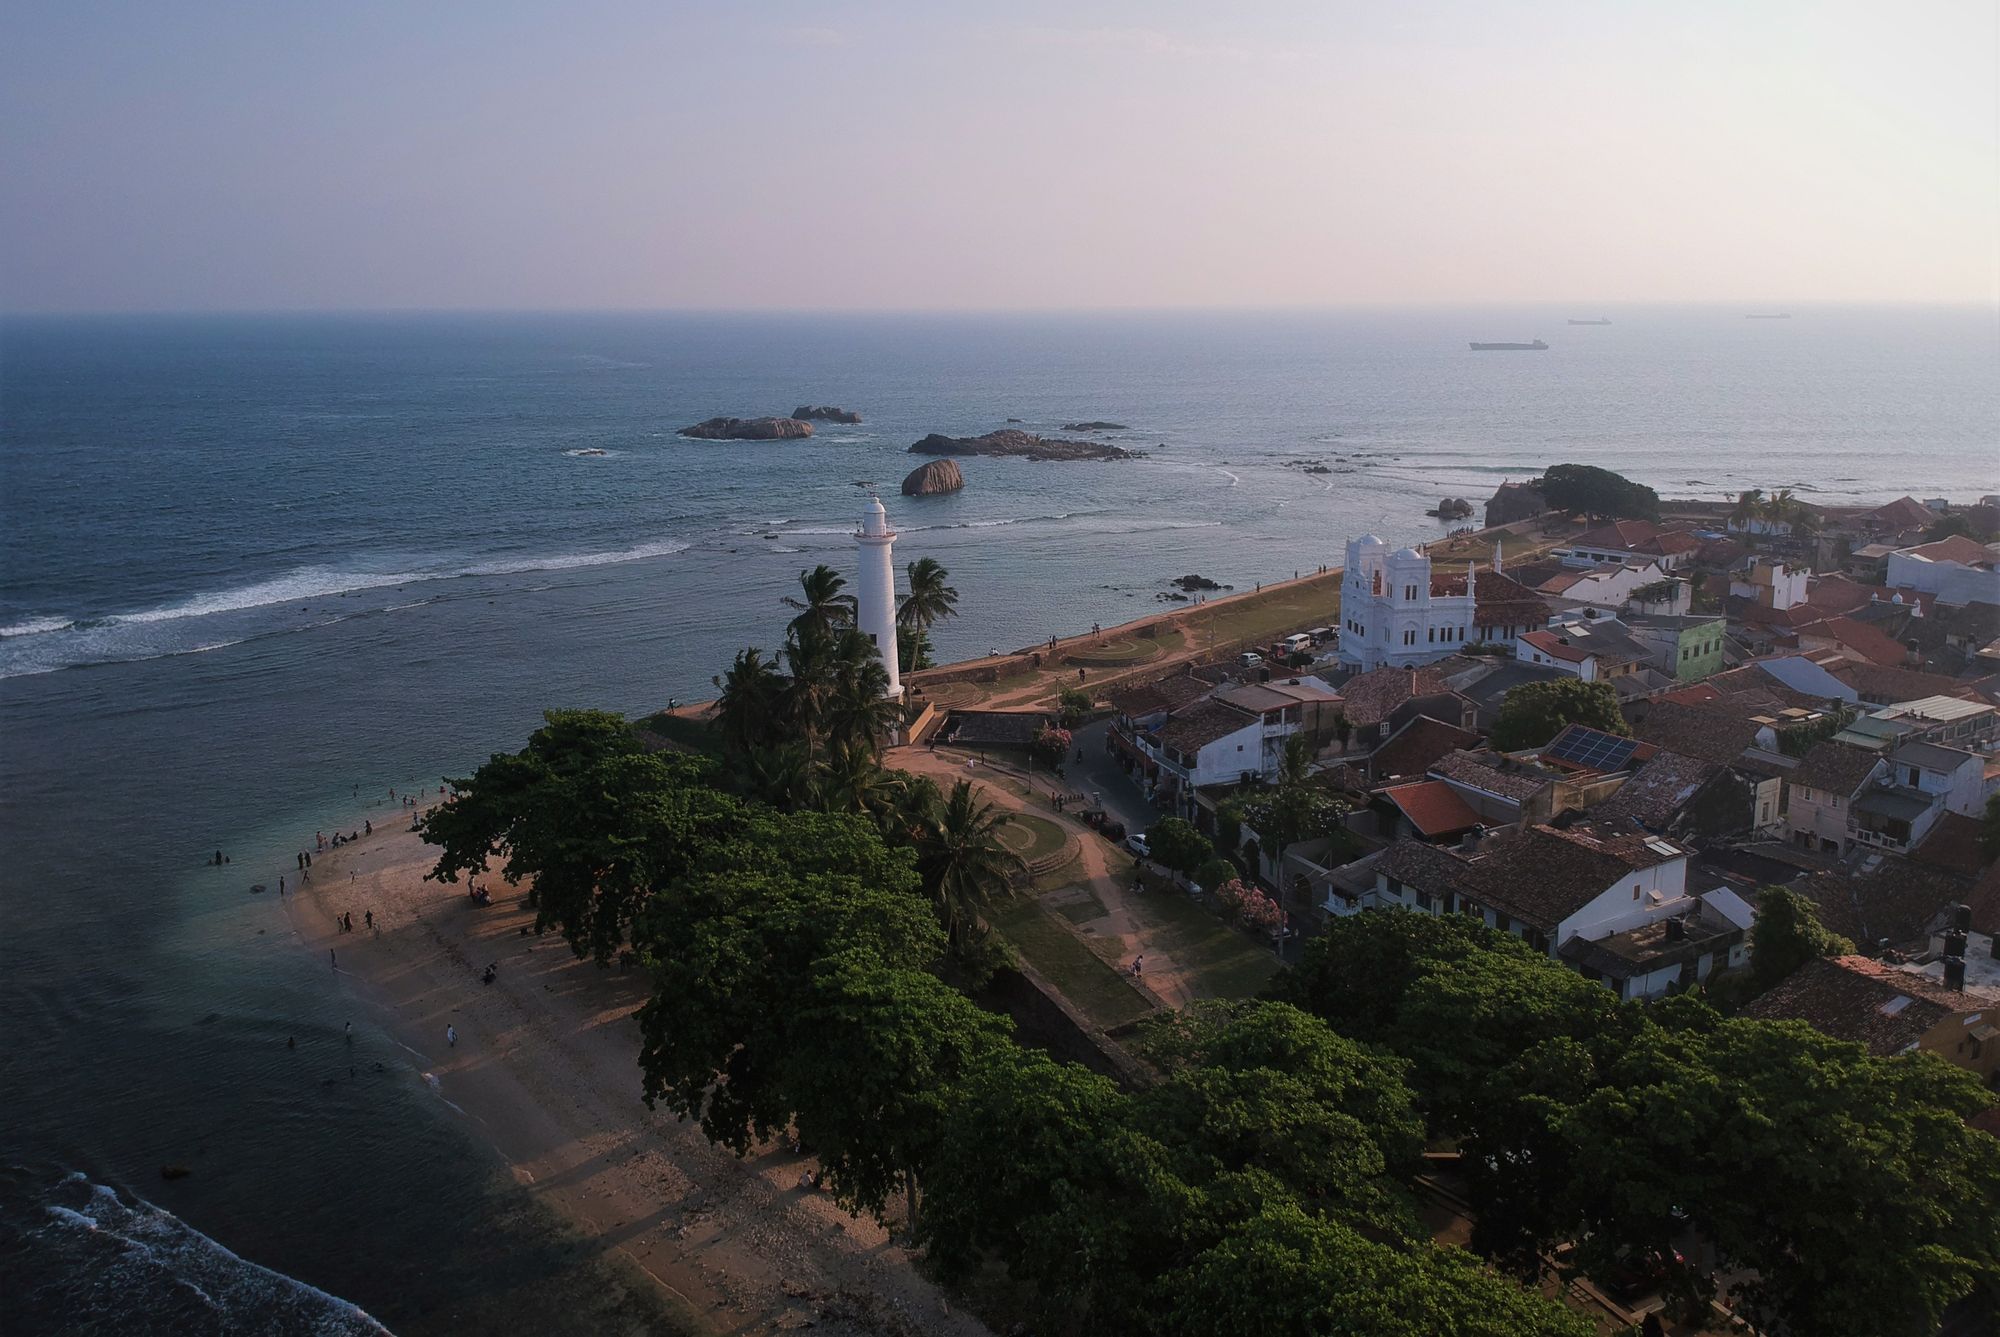 An aerial view of the part of the Galle Fort, Sri Lanka with the fort, the Galle Fort Lighthouse and the ocean in sight.